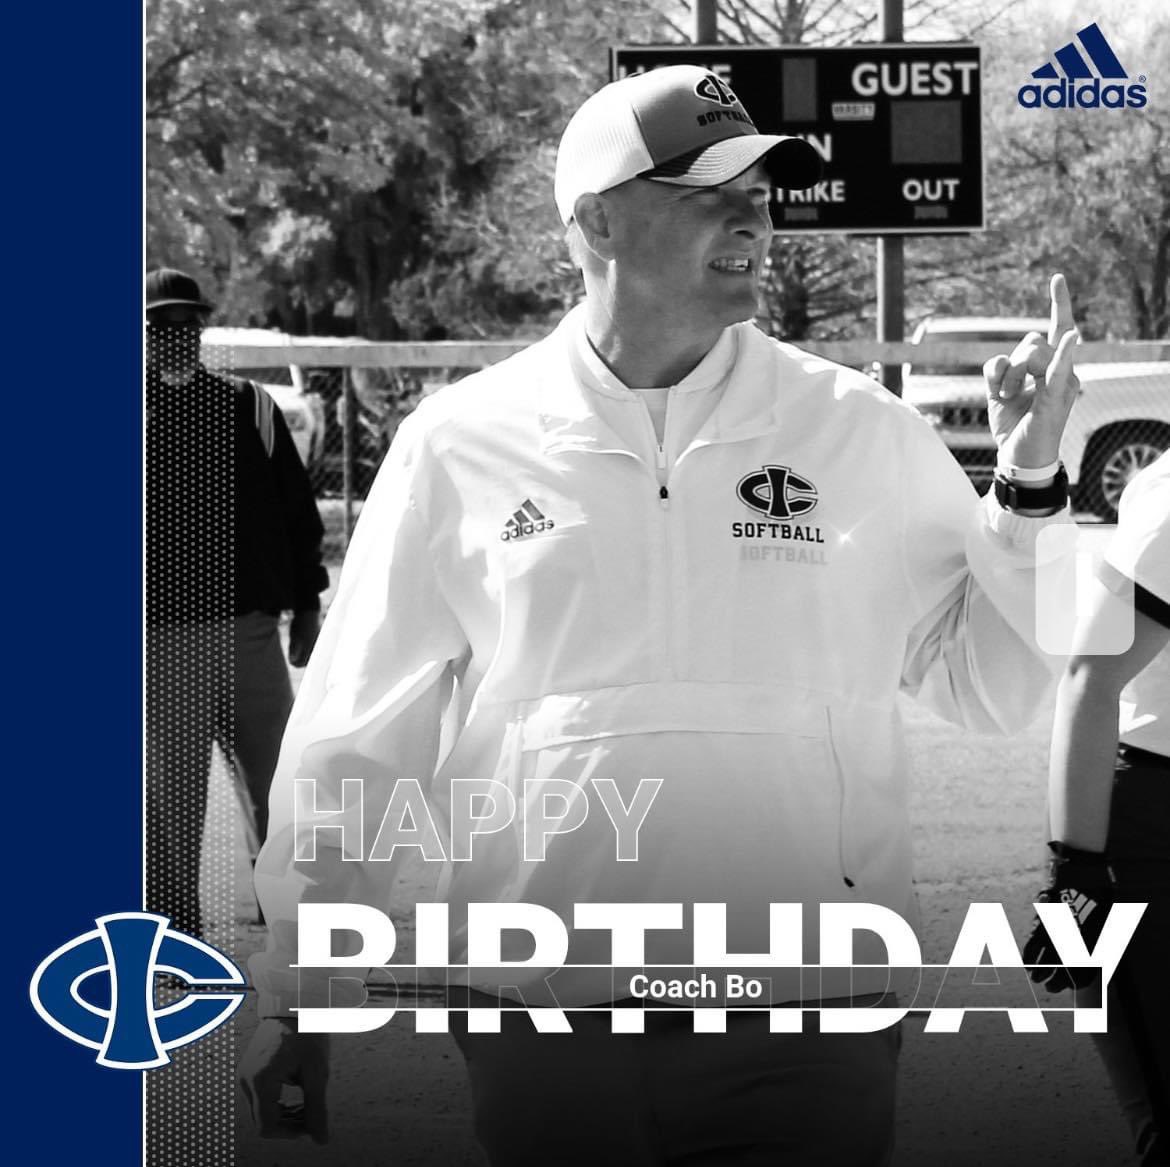 Triton Nation, please join us in wishing our fearless leader, @BoTjebben a very Happy Birthday! Thank you for your dedication and all you do for us, Coach!

𝘐𝘧 𝘺𝘰𝘶 𝘴𝘦𝘦 𝘩𝘪𝘮 𝘰𝘶𝘵 𝘳𝘦𝘤𝘳𝘶𝘪𝘵𝘪𝘯𝘨 𝘵𝘰𝘥𝘢𝘺, 𝘣𝘦 𝘴𝘶𝘳𝘦 𝘵𝘰 𝘴𝘵𝘰𝘱 𝘢𝘯𝘥 𝘴𝘢𝘺 𝘩𝘪! ✋🏻